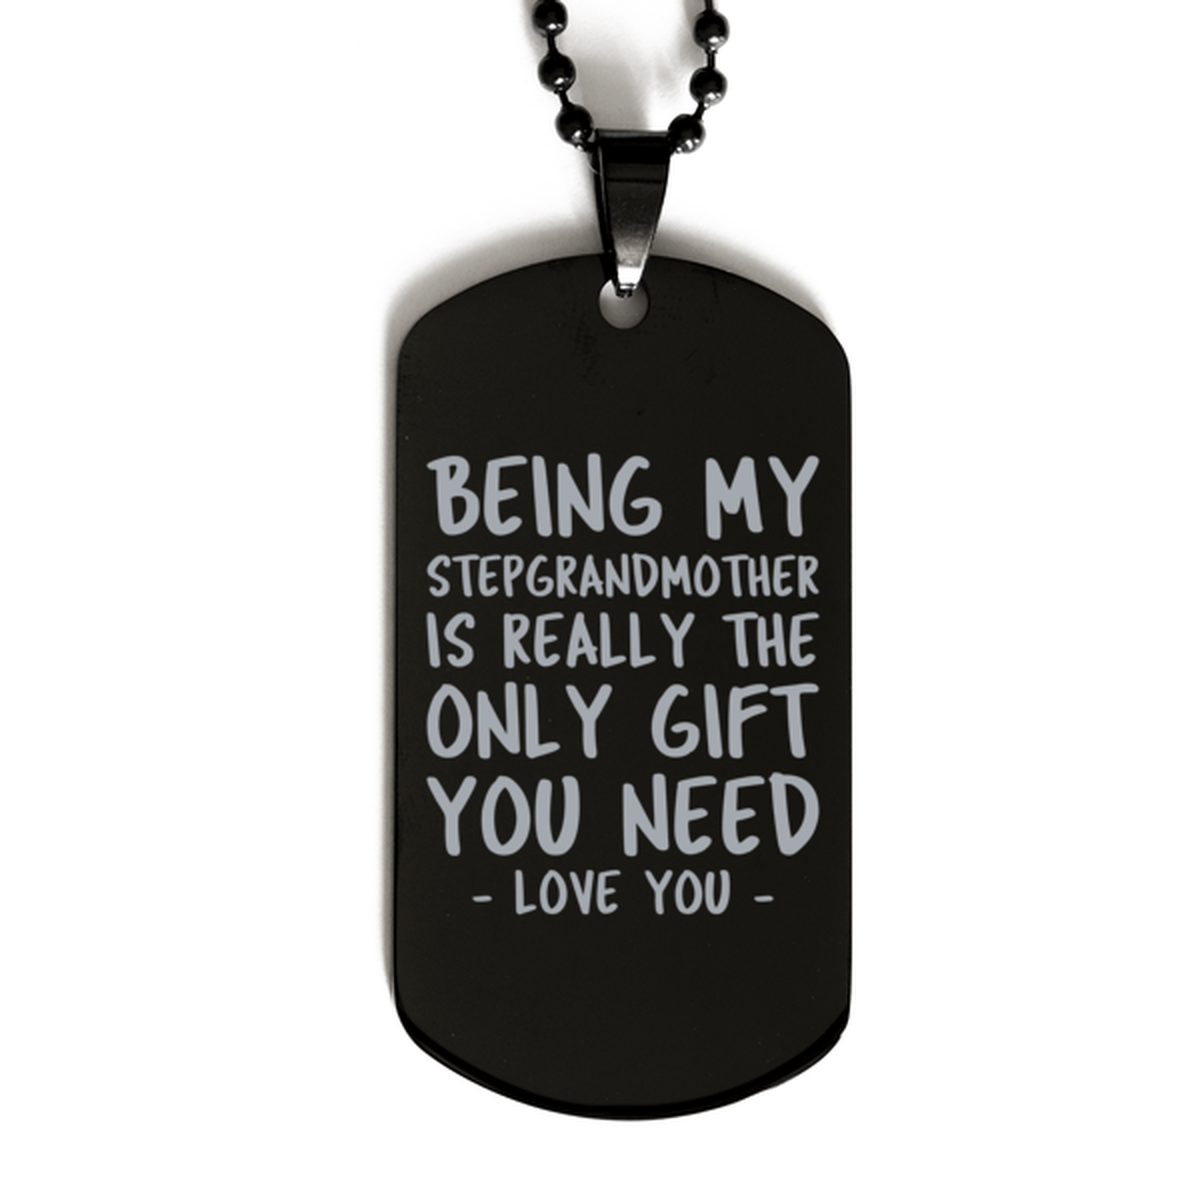 Funny Stepgrandmother Black Dog Tag Necklace, Being My Stepgrandmother Is Really the Only Gift You Need, Best Birthday Gifts for Stepgrandmother